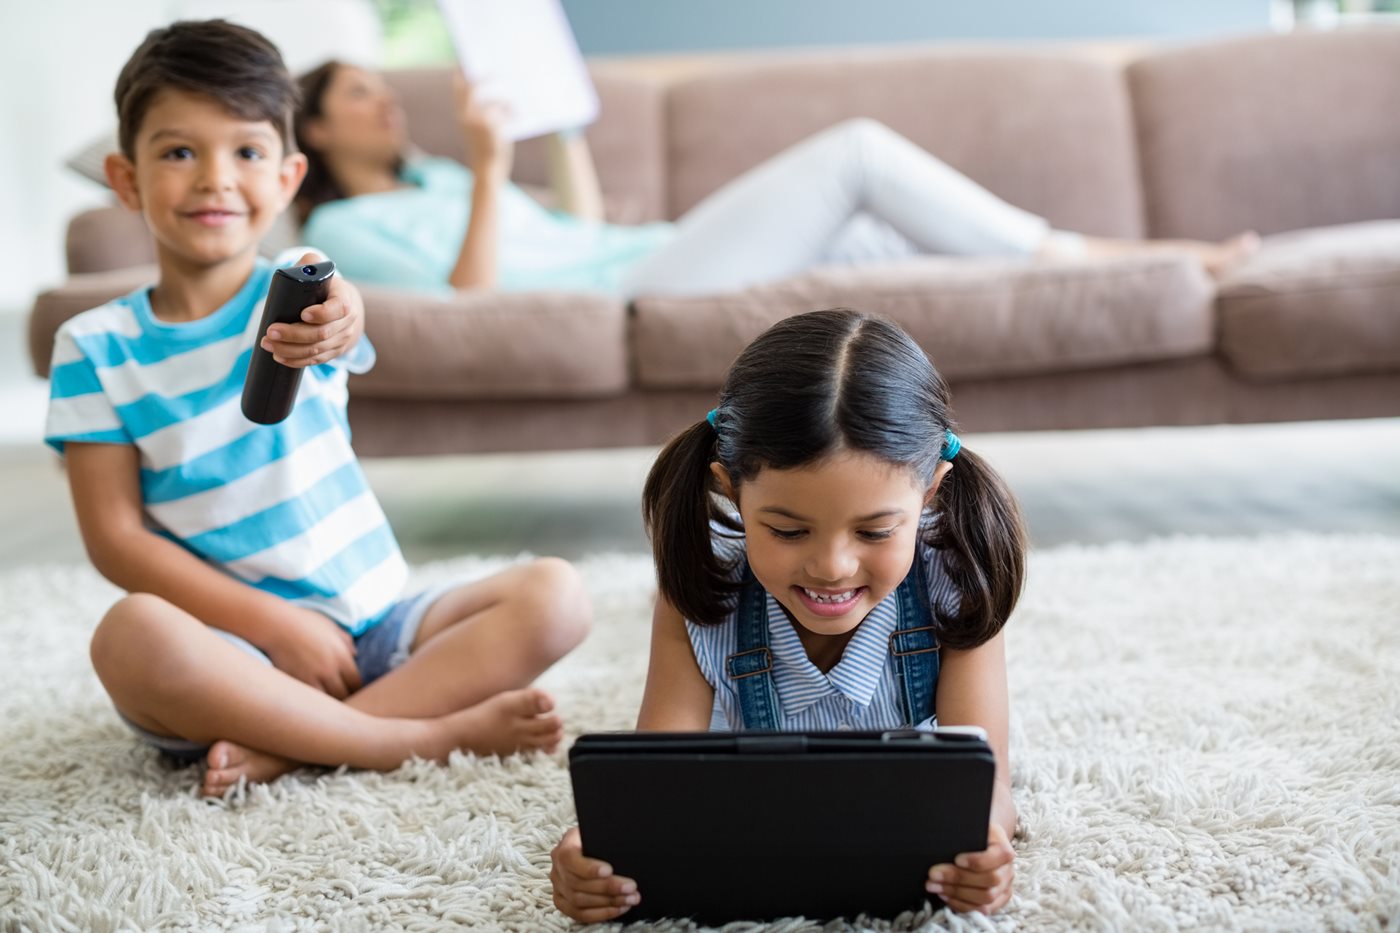 A young boy points a remote at the TV while his sister plays on her iPad